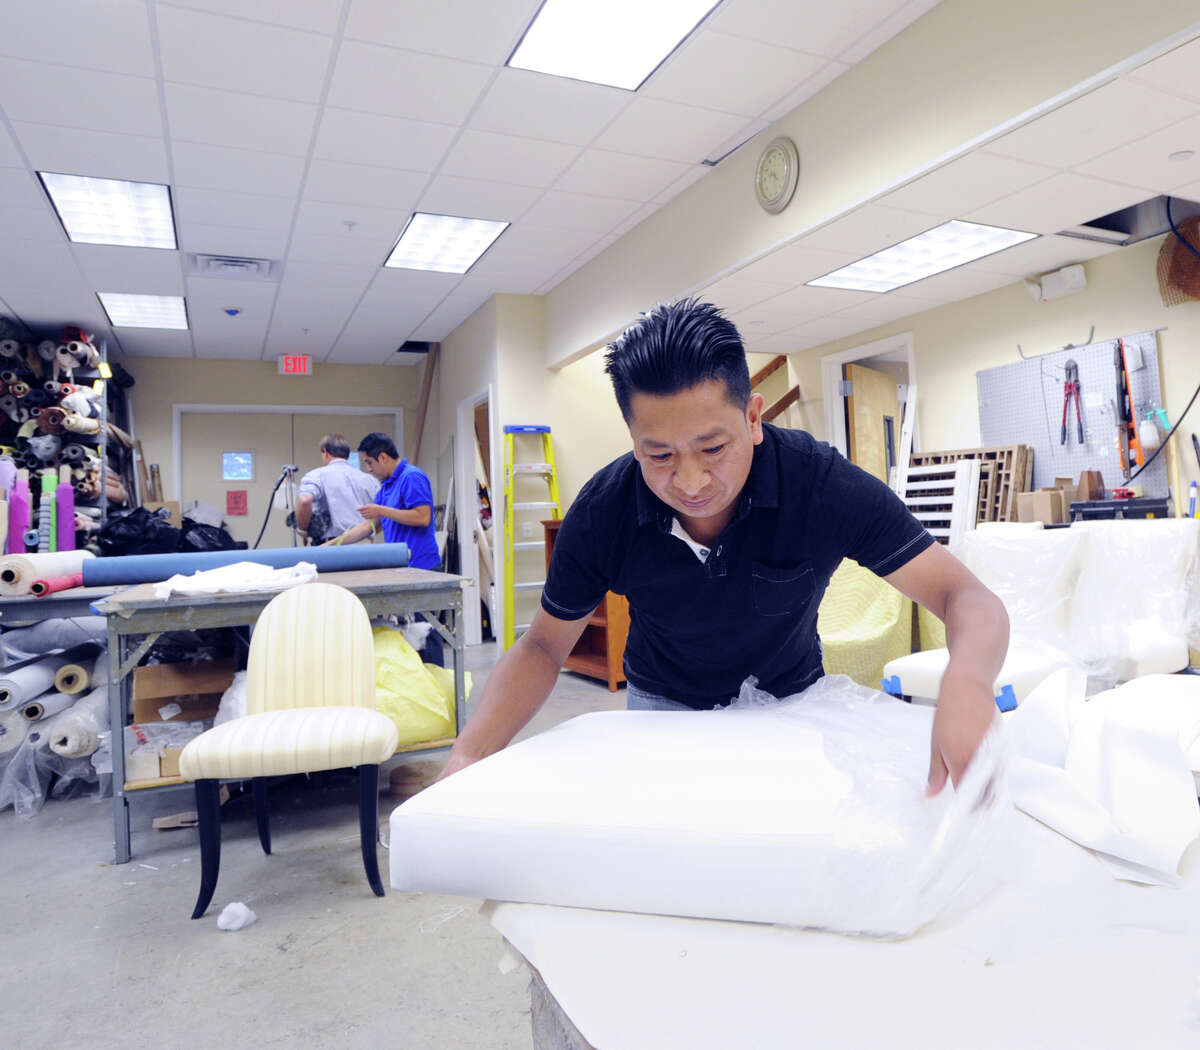 Juan Guaman, an upholsterer for Tiger Lily's Interior Design Studio in Greenwich, works Wednesday on the white seat cushion that Pope Francis will use during his Madison Square Garden appearance in New York City in September.